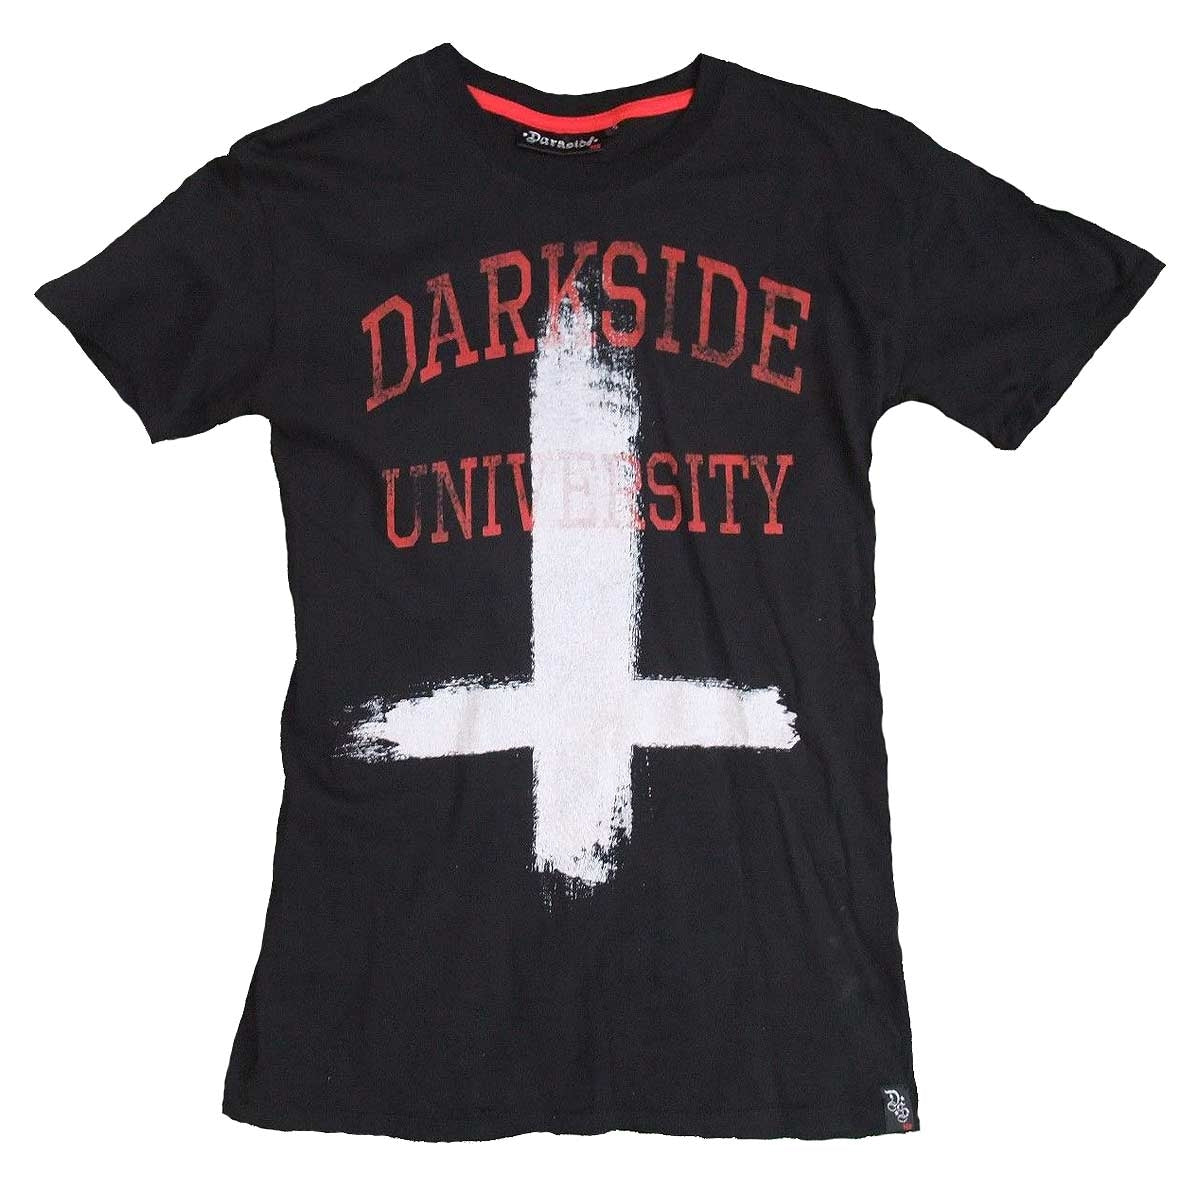 Men's black t-shirt with inverted cross